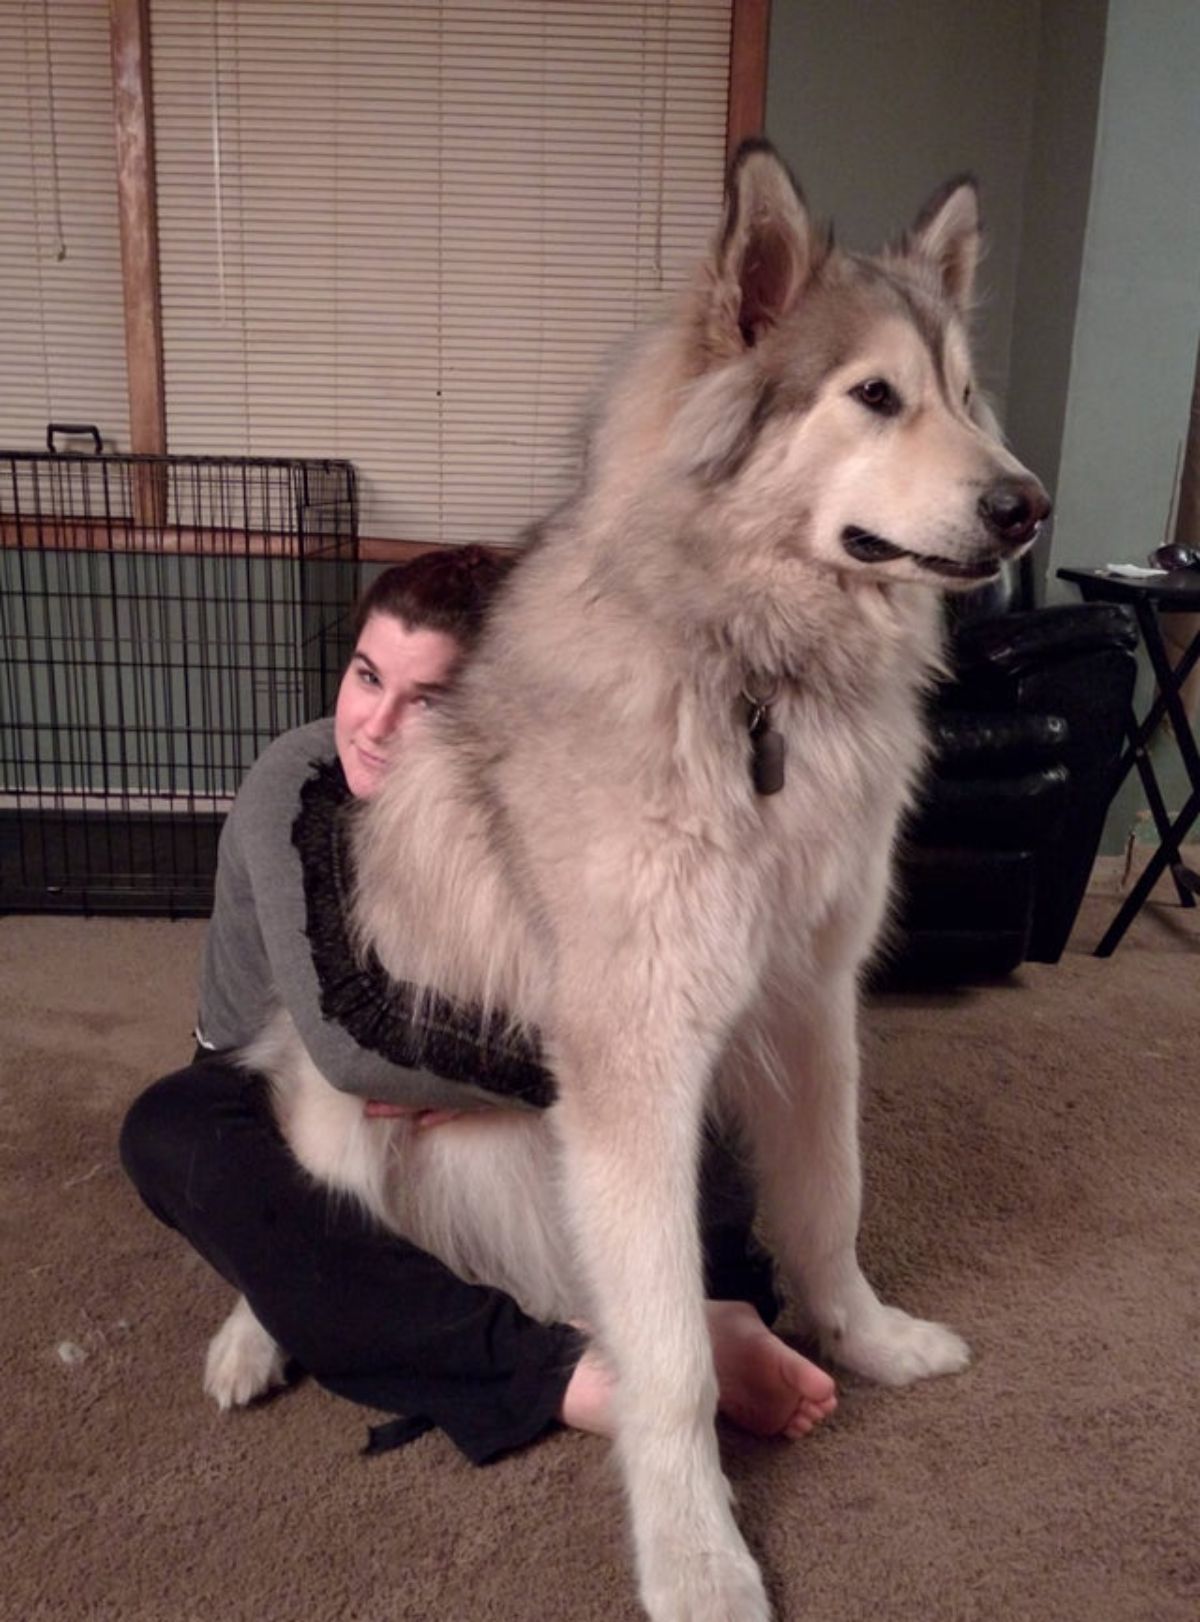 alaskan malamute sitting on the floor being hugged by a woman sitting on the floor